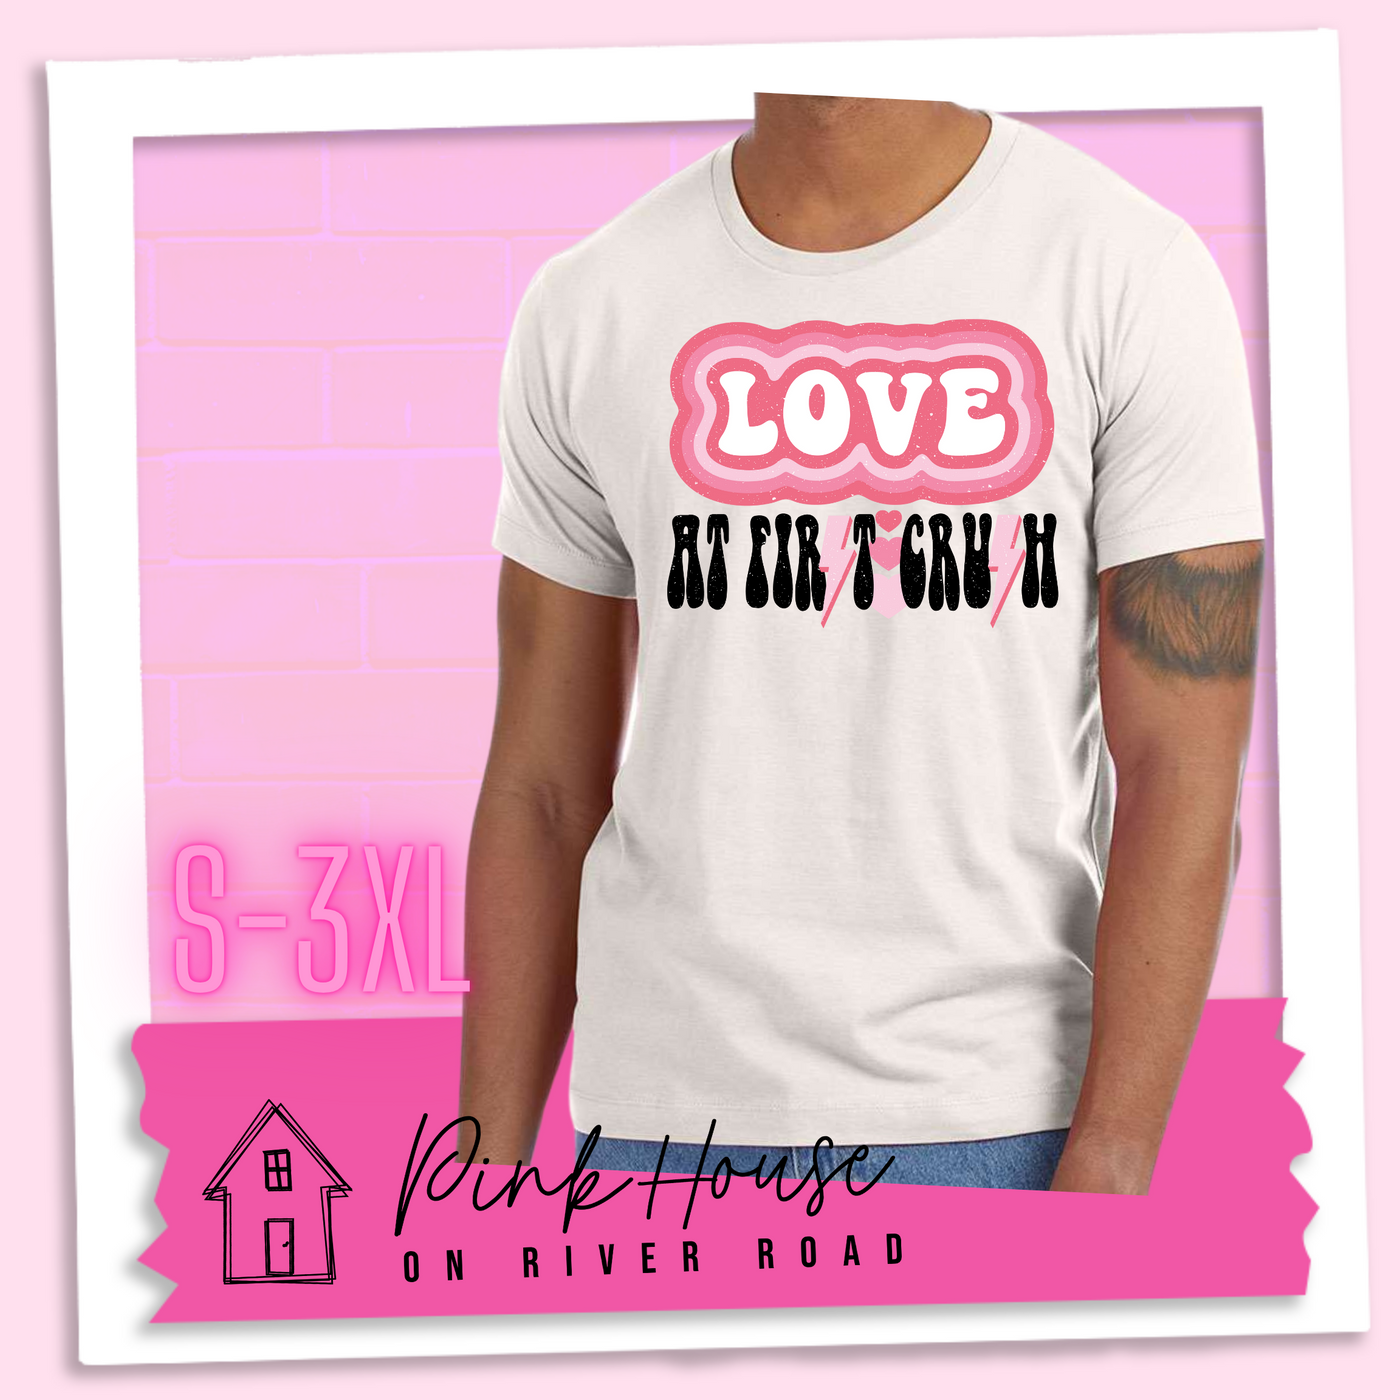 Dust Tee. The graphic has the word Love in retro bubble letters with differetn colored pink outlines radiating from the word, underneath are the worxs at first in black with the s in first replaced with a pink lightning bolt, then there are three different colored hearts followed by the word crush in the same black font with the S replaced with the same pink lightening bolt.